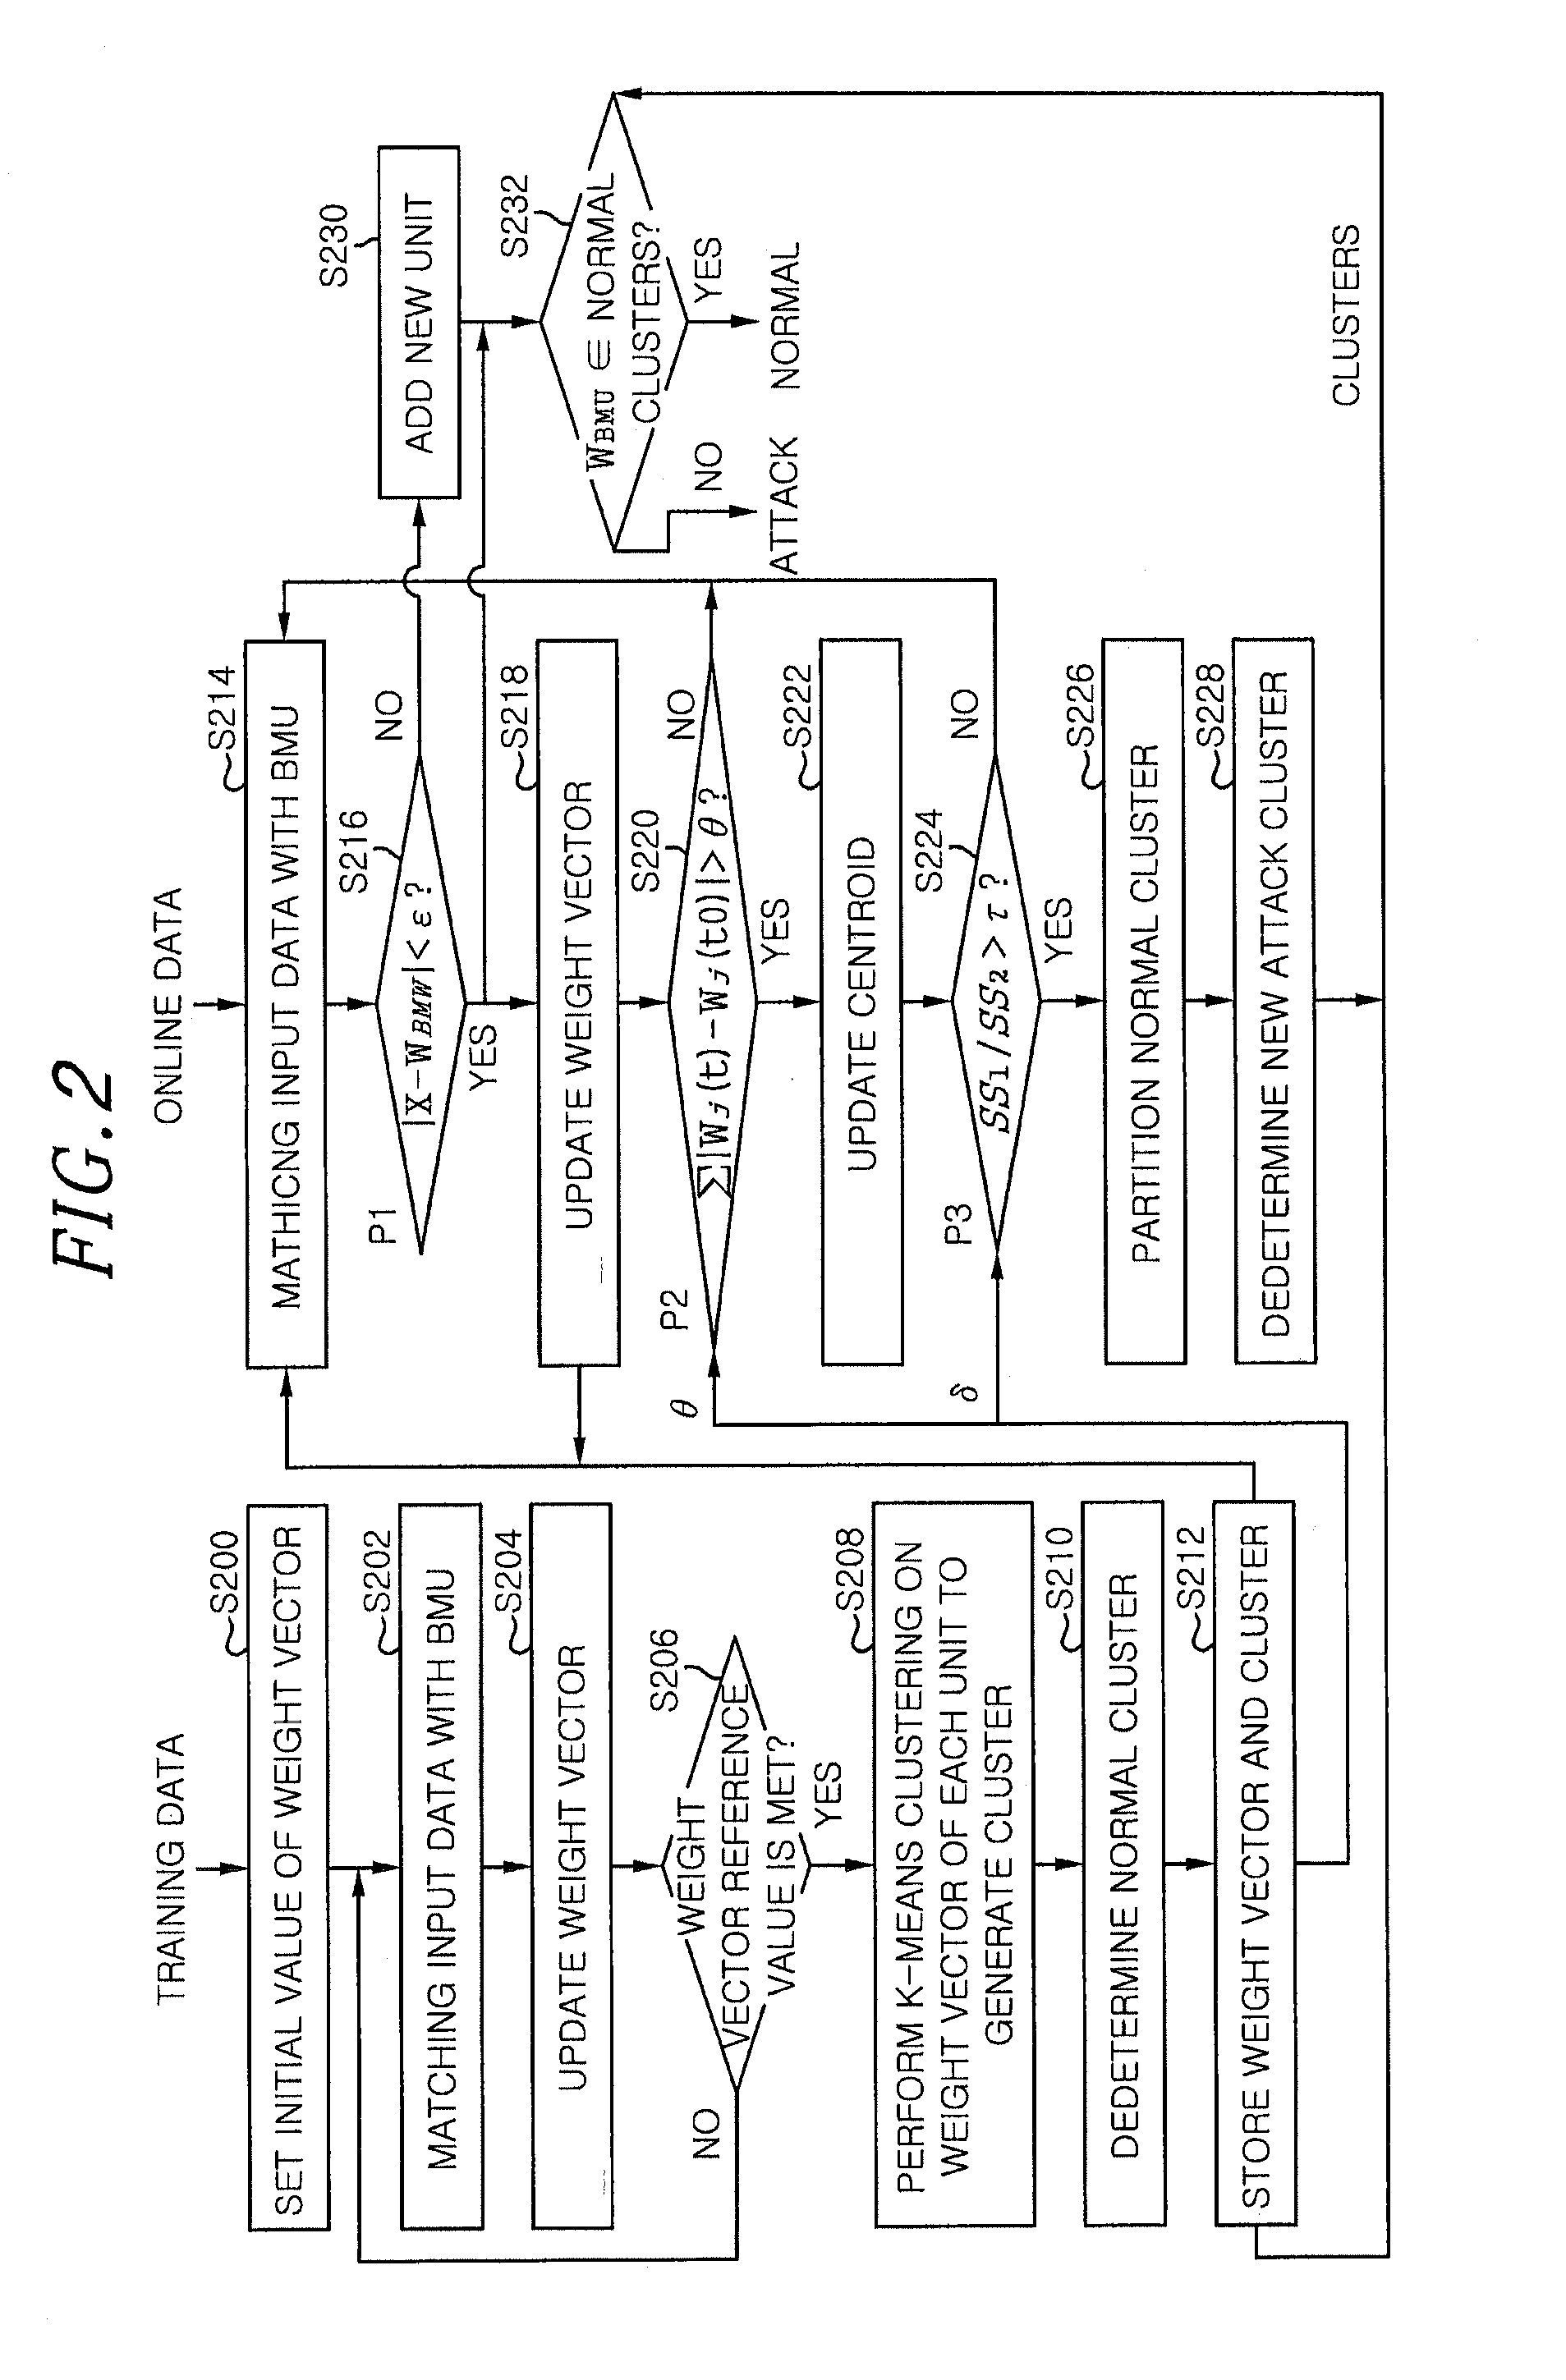 Method and apparatus for generating adaptive security model